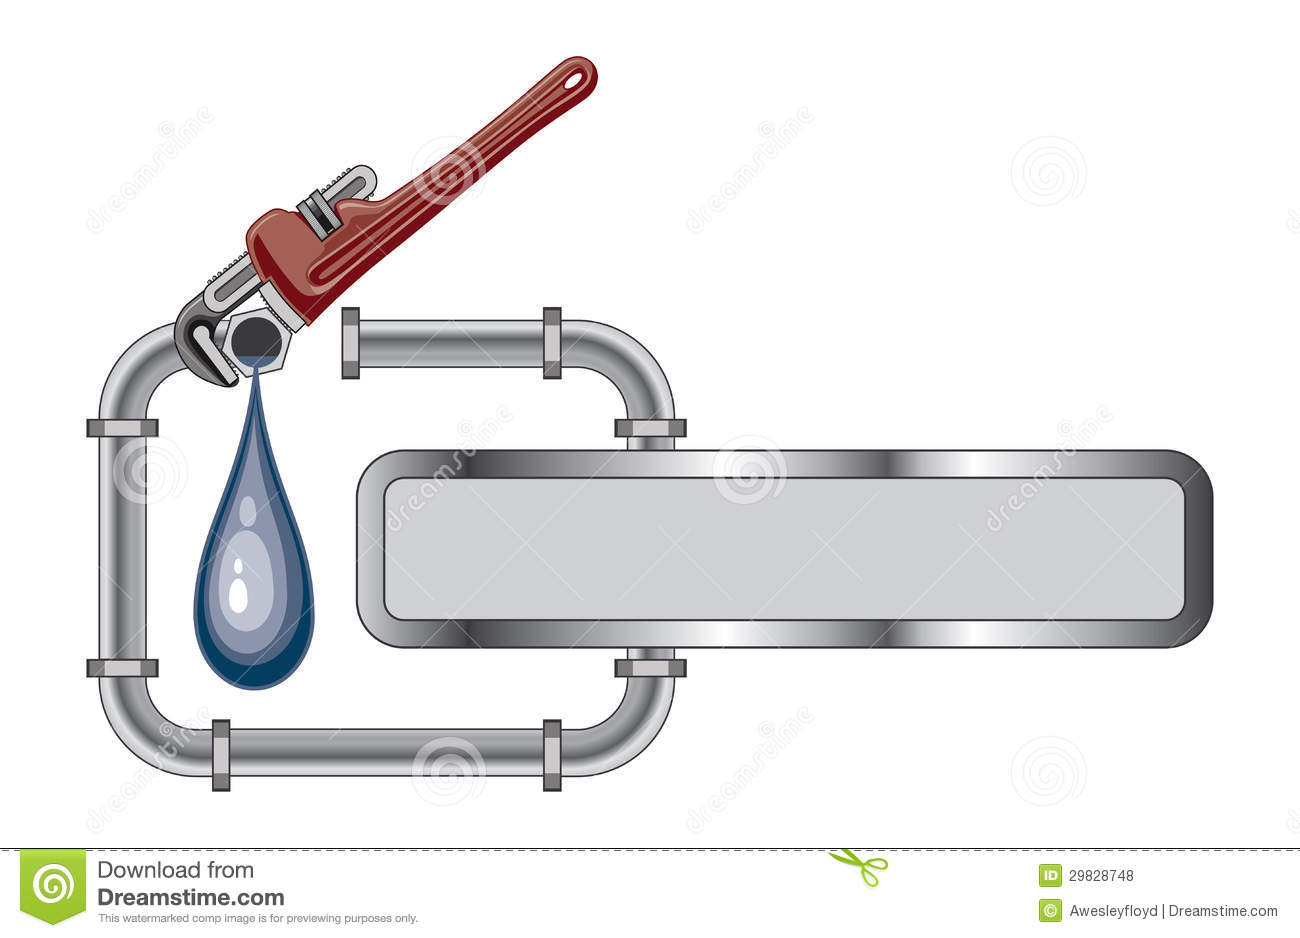 Illustration Of A Plumbing Design With Pipes Adjustable Wrench And